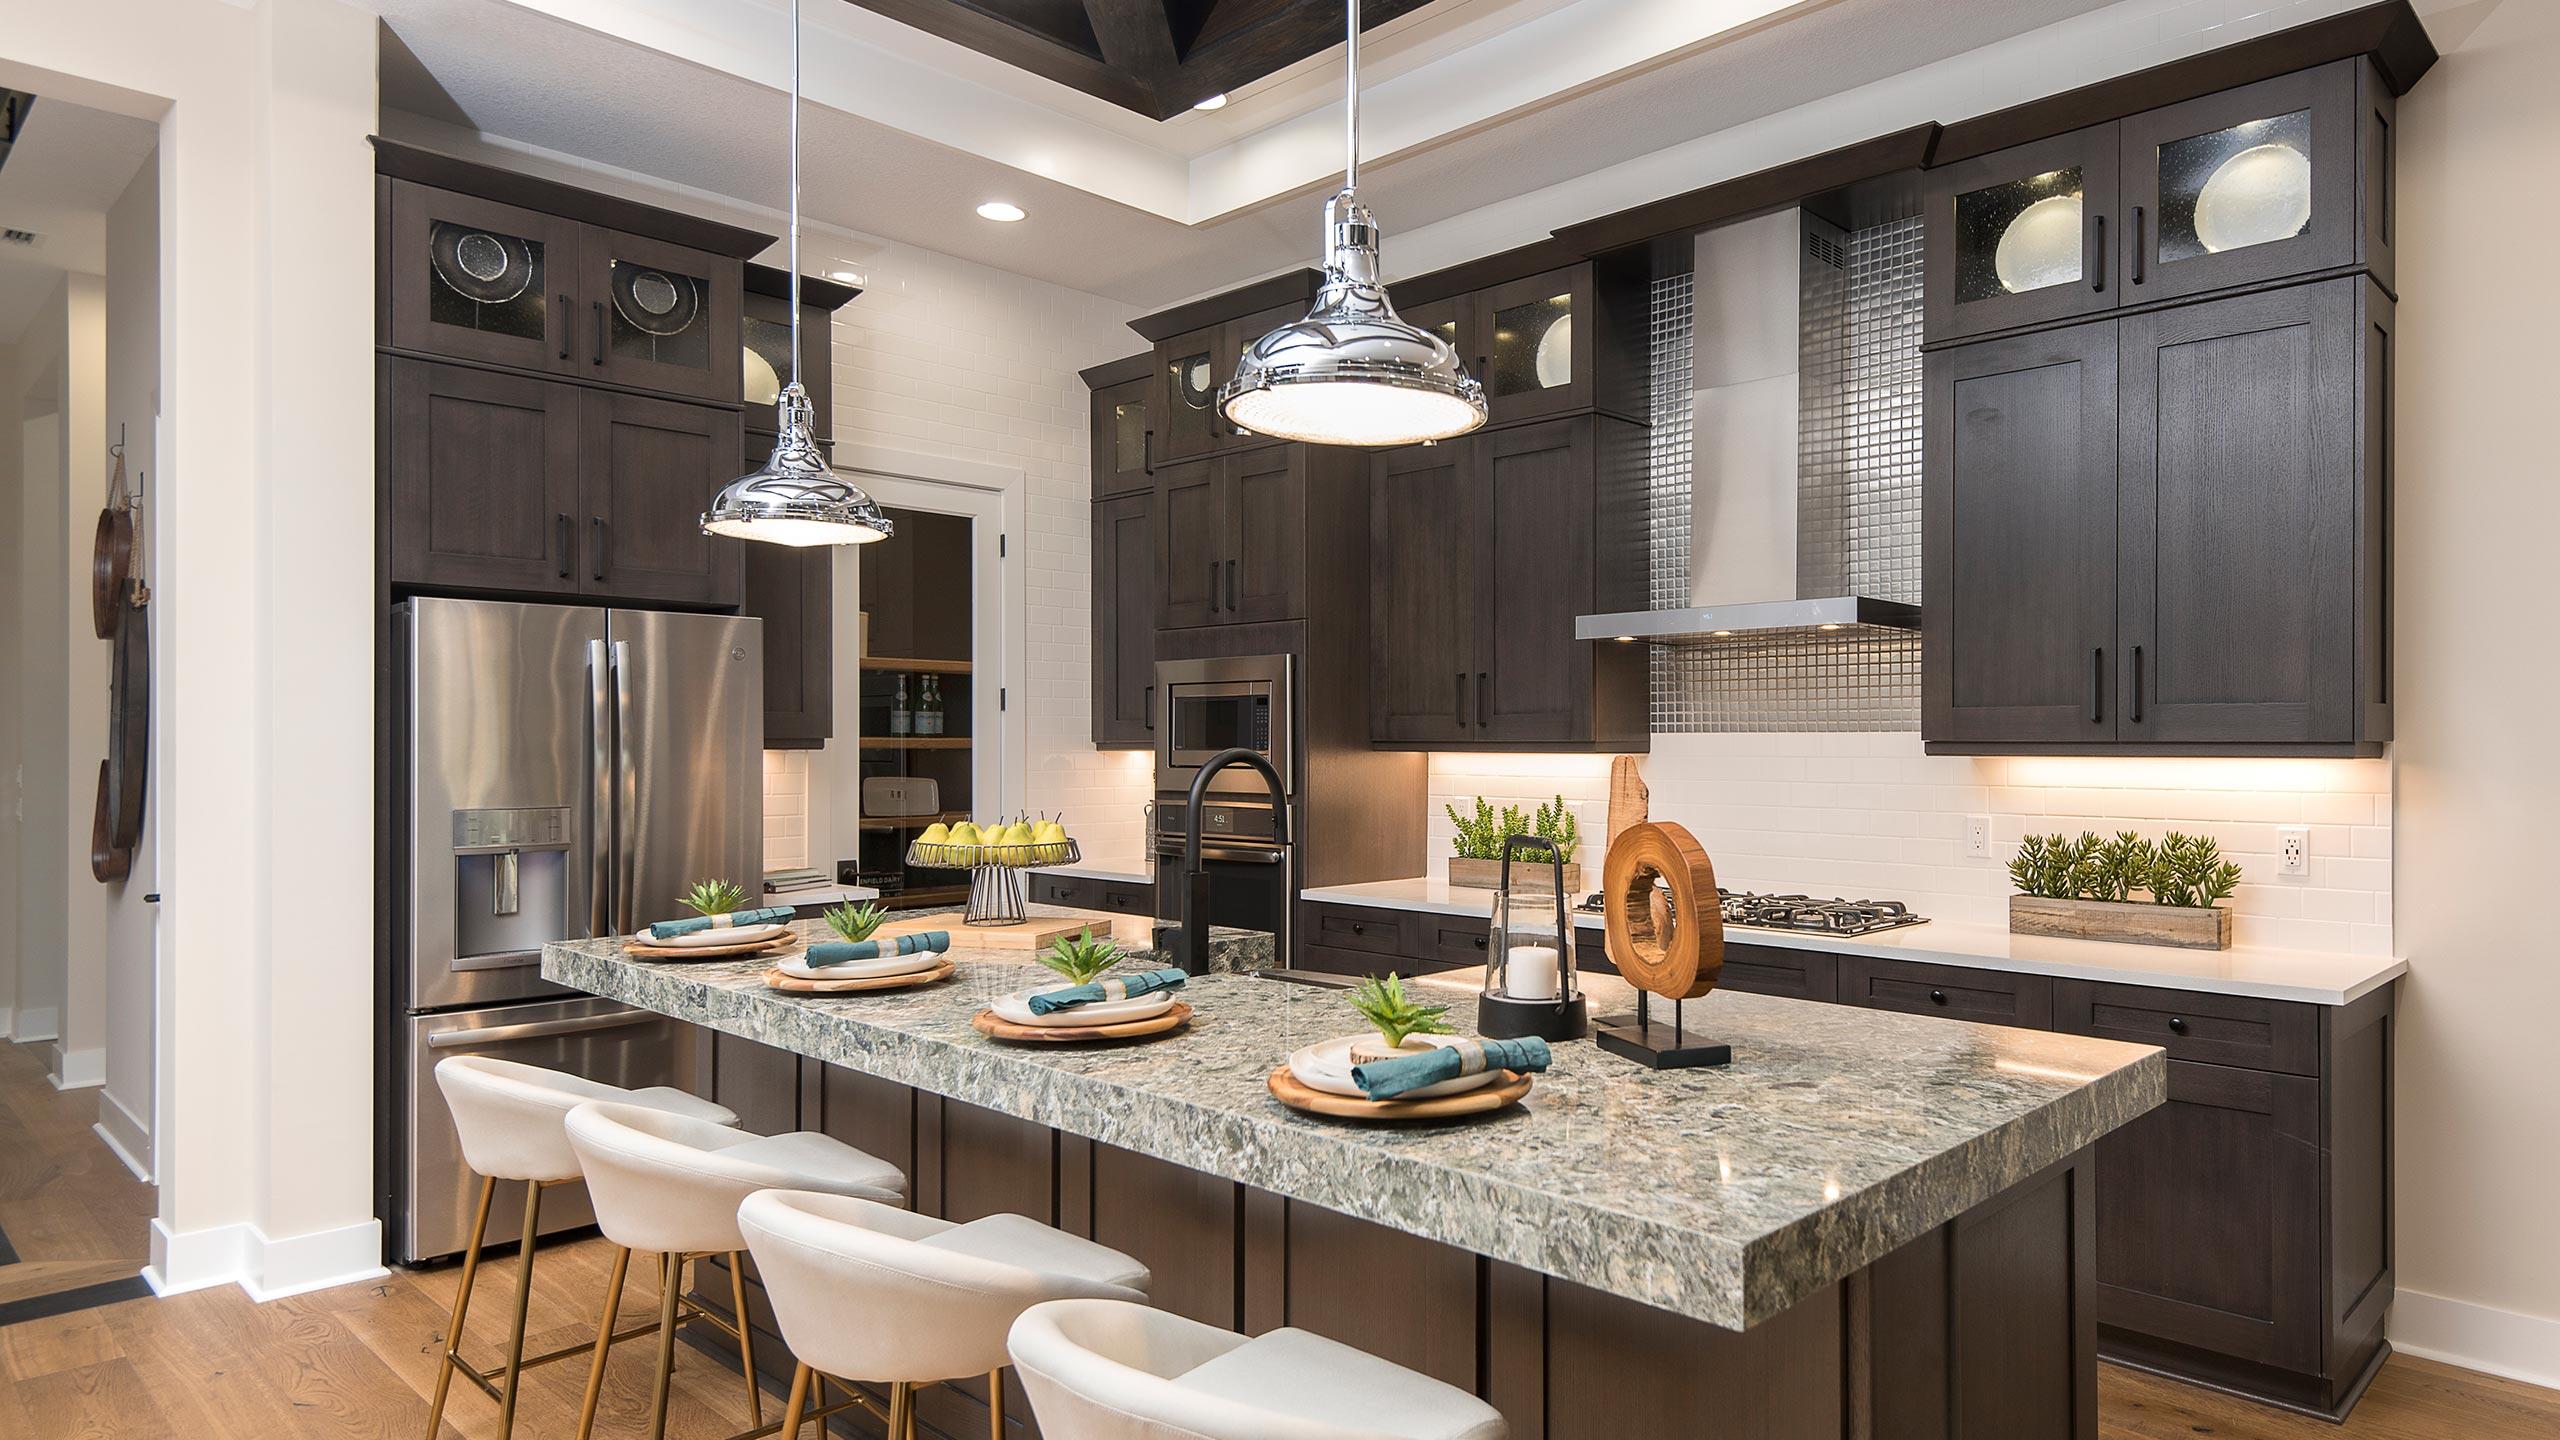 a view of kitchen island with granite countertop furniture and a kitchen view